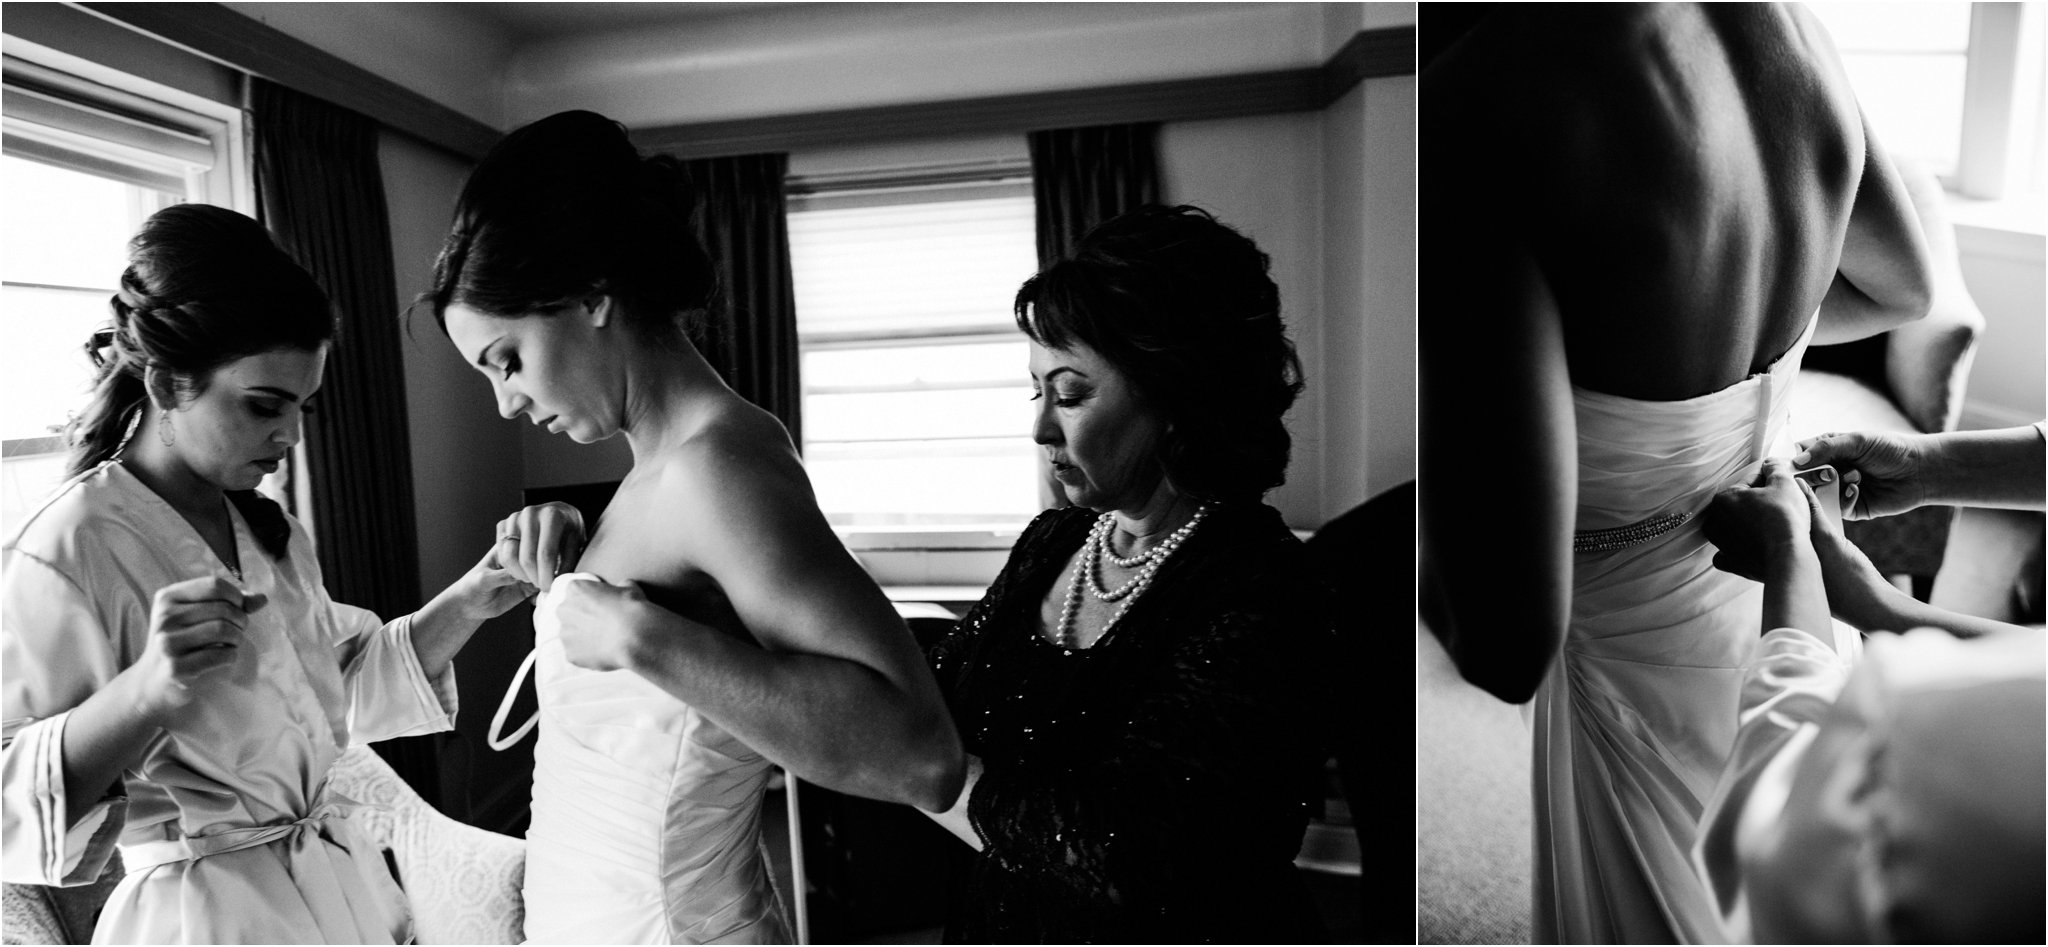 black and white | wedding | wedding photos | wedding photography | images by feliciathephotographer.com | Country Club Plaza | Kansas City | Unity Temple | wedding prep | getting ready | candid | stepping into dress | David's Bridal | mother of the bride | mother with bride | beaded belt 